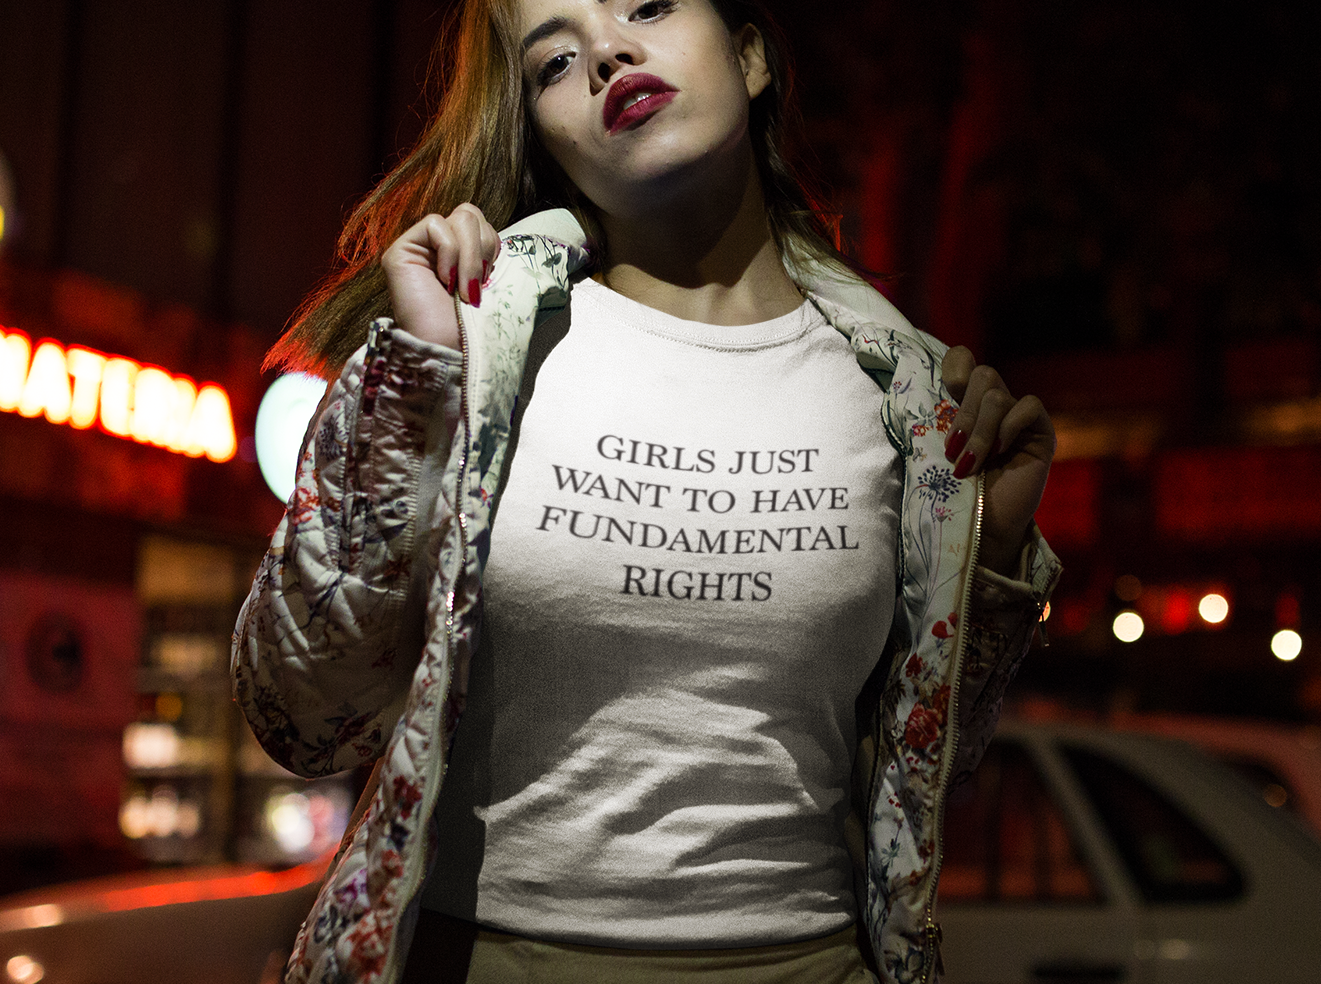 Girls just want to have fundamental rights T-shirt - Urbantshirts.co.uk